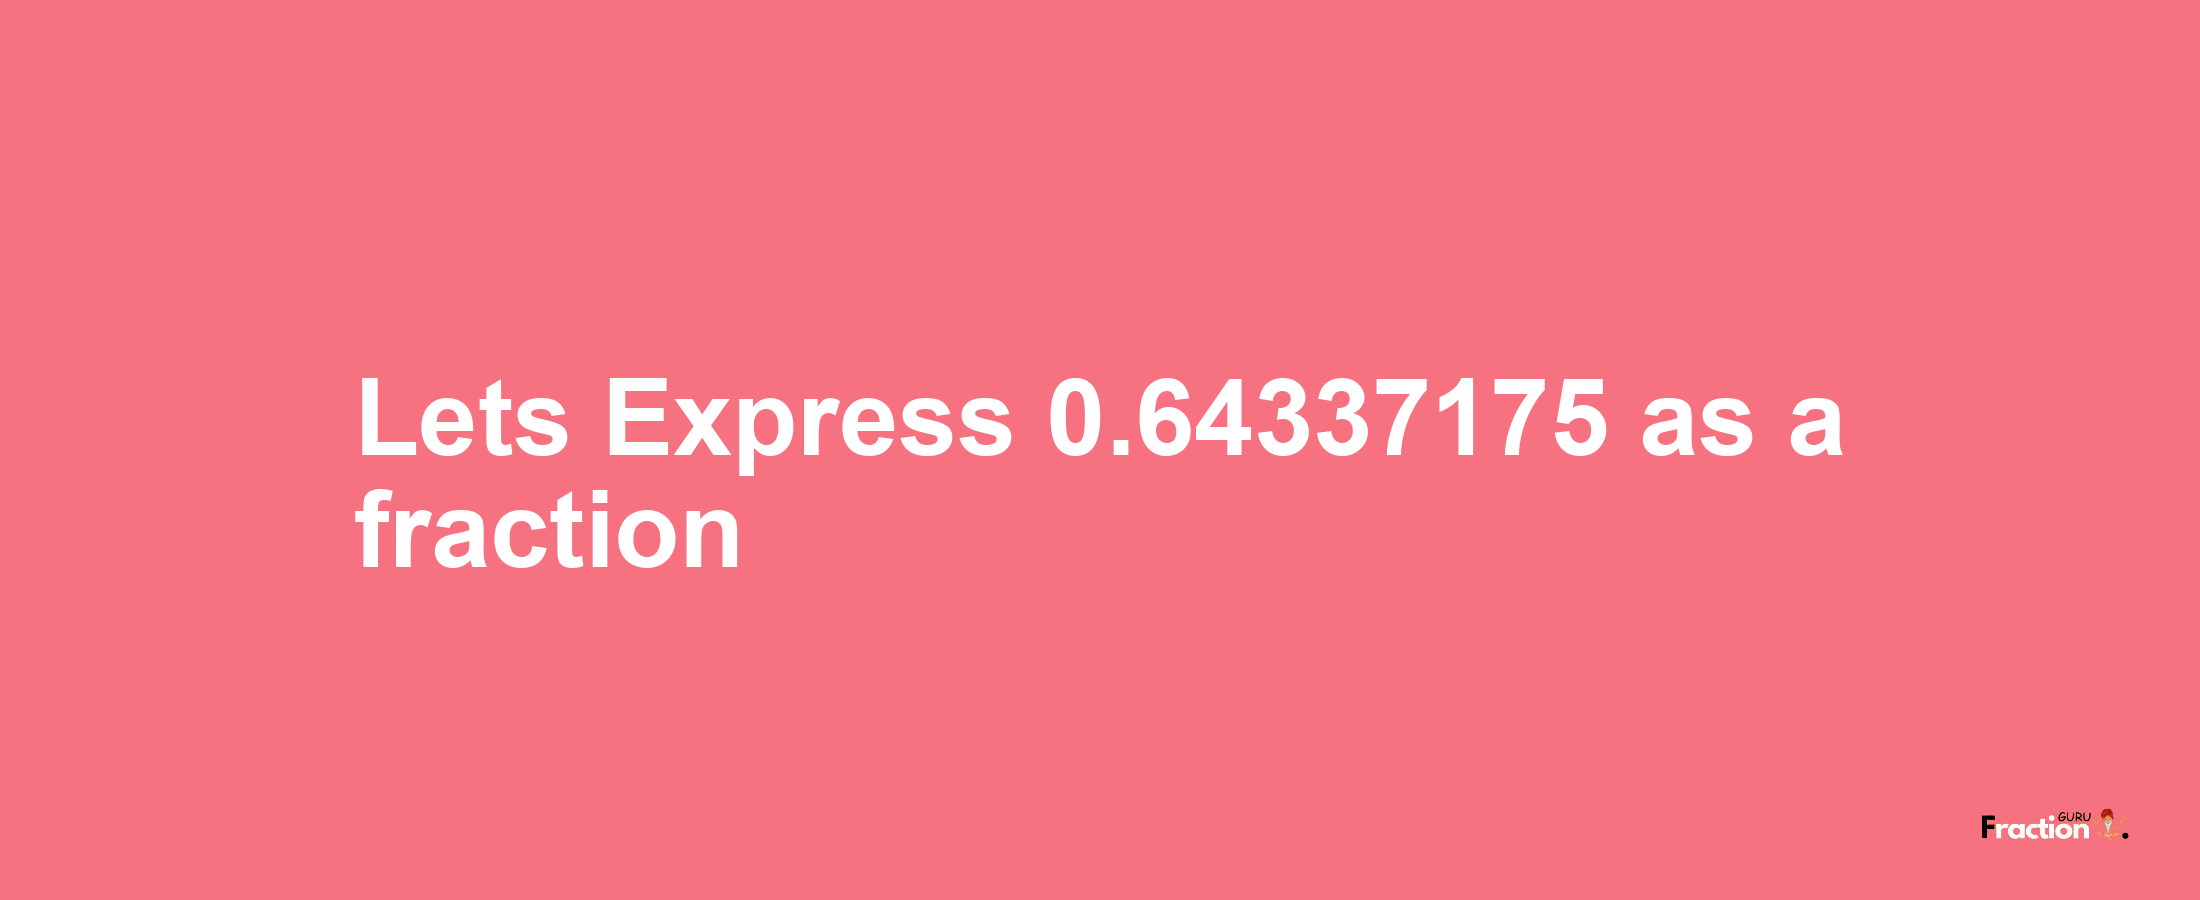 Lets Express 0.64337175 as afraction